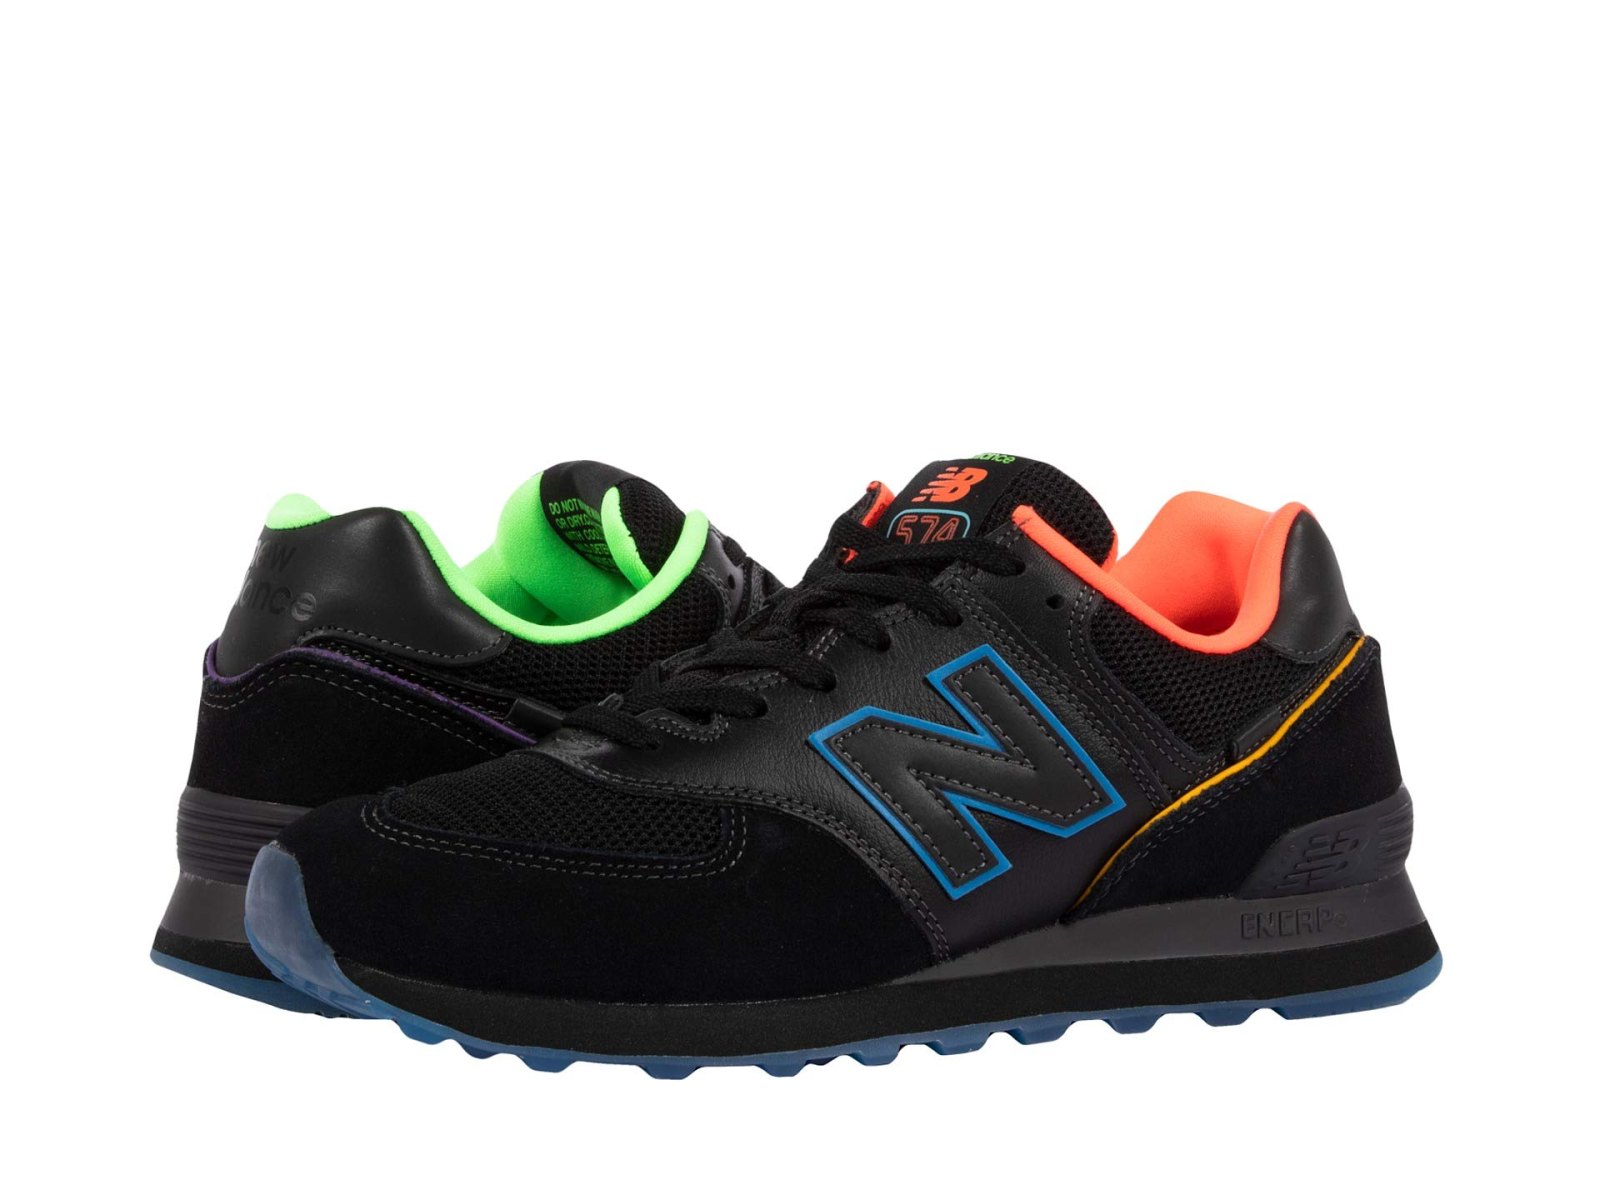 Get These Limited Edition New Balance Sneakers Only at Zappos! UsWeekly